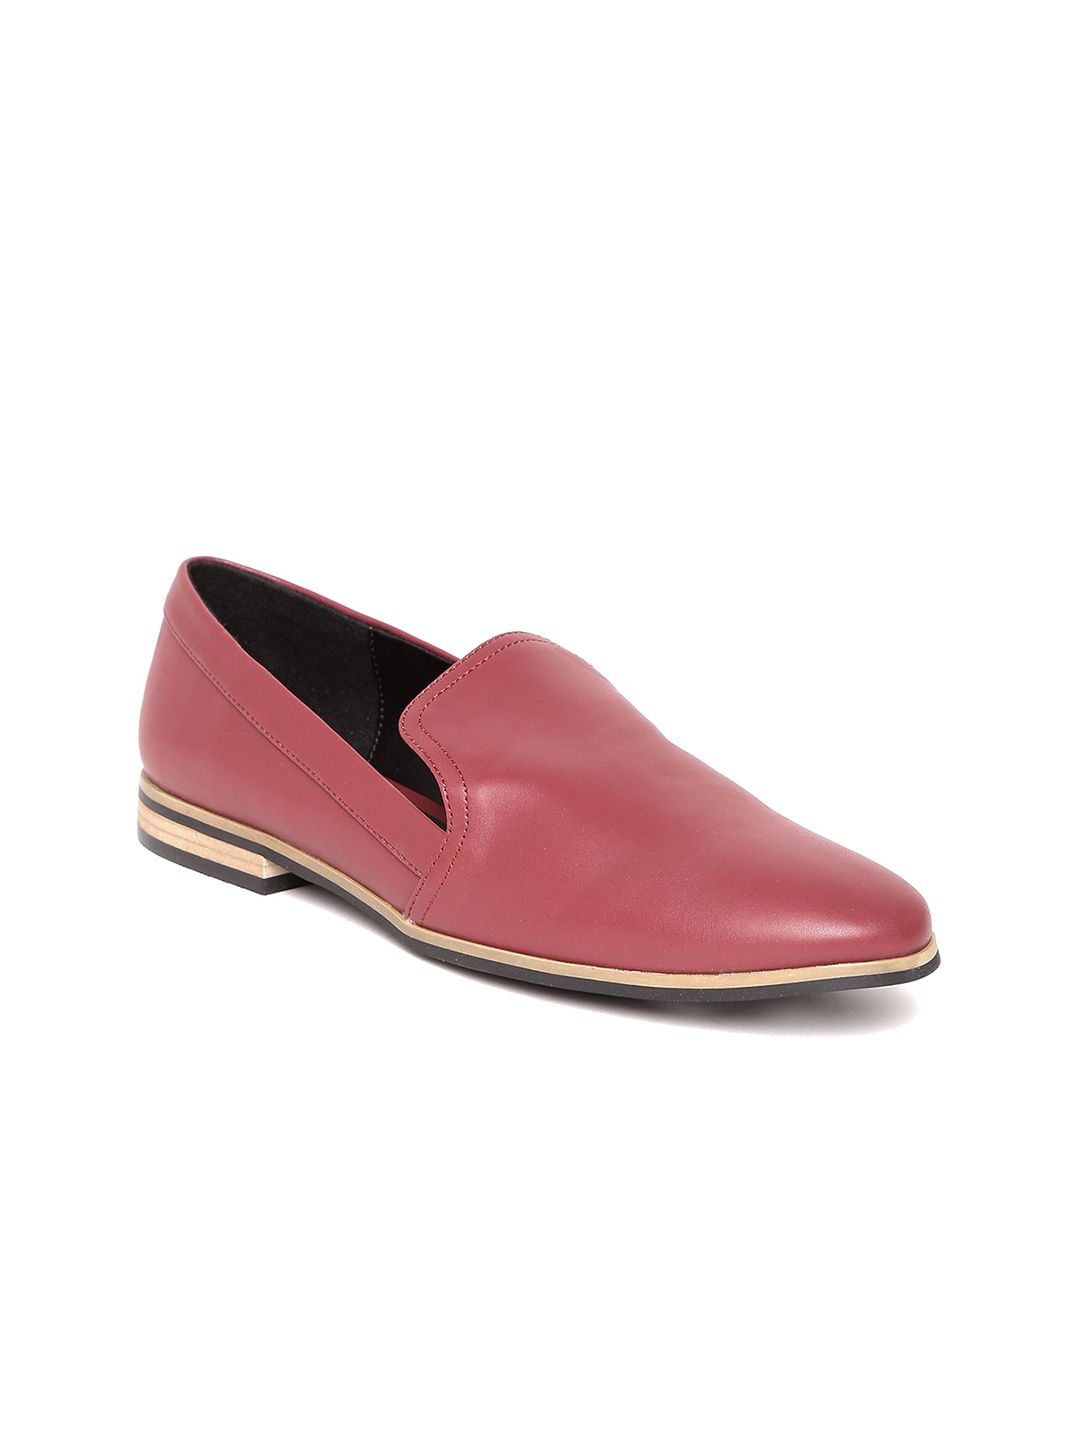 Allen Solly Women Red Loafers Price in India